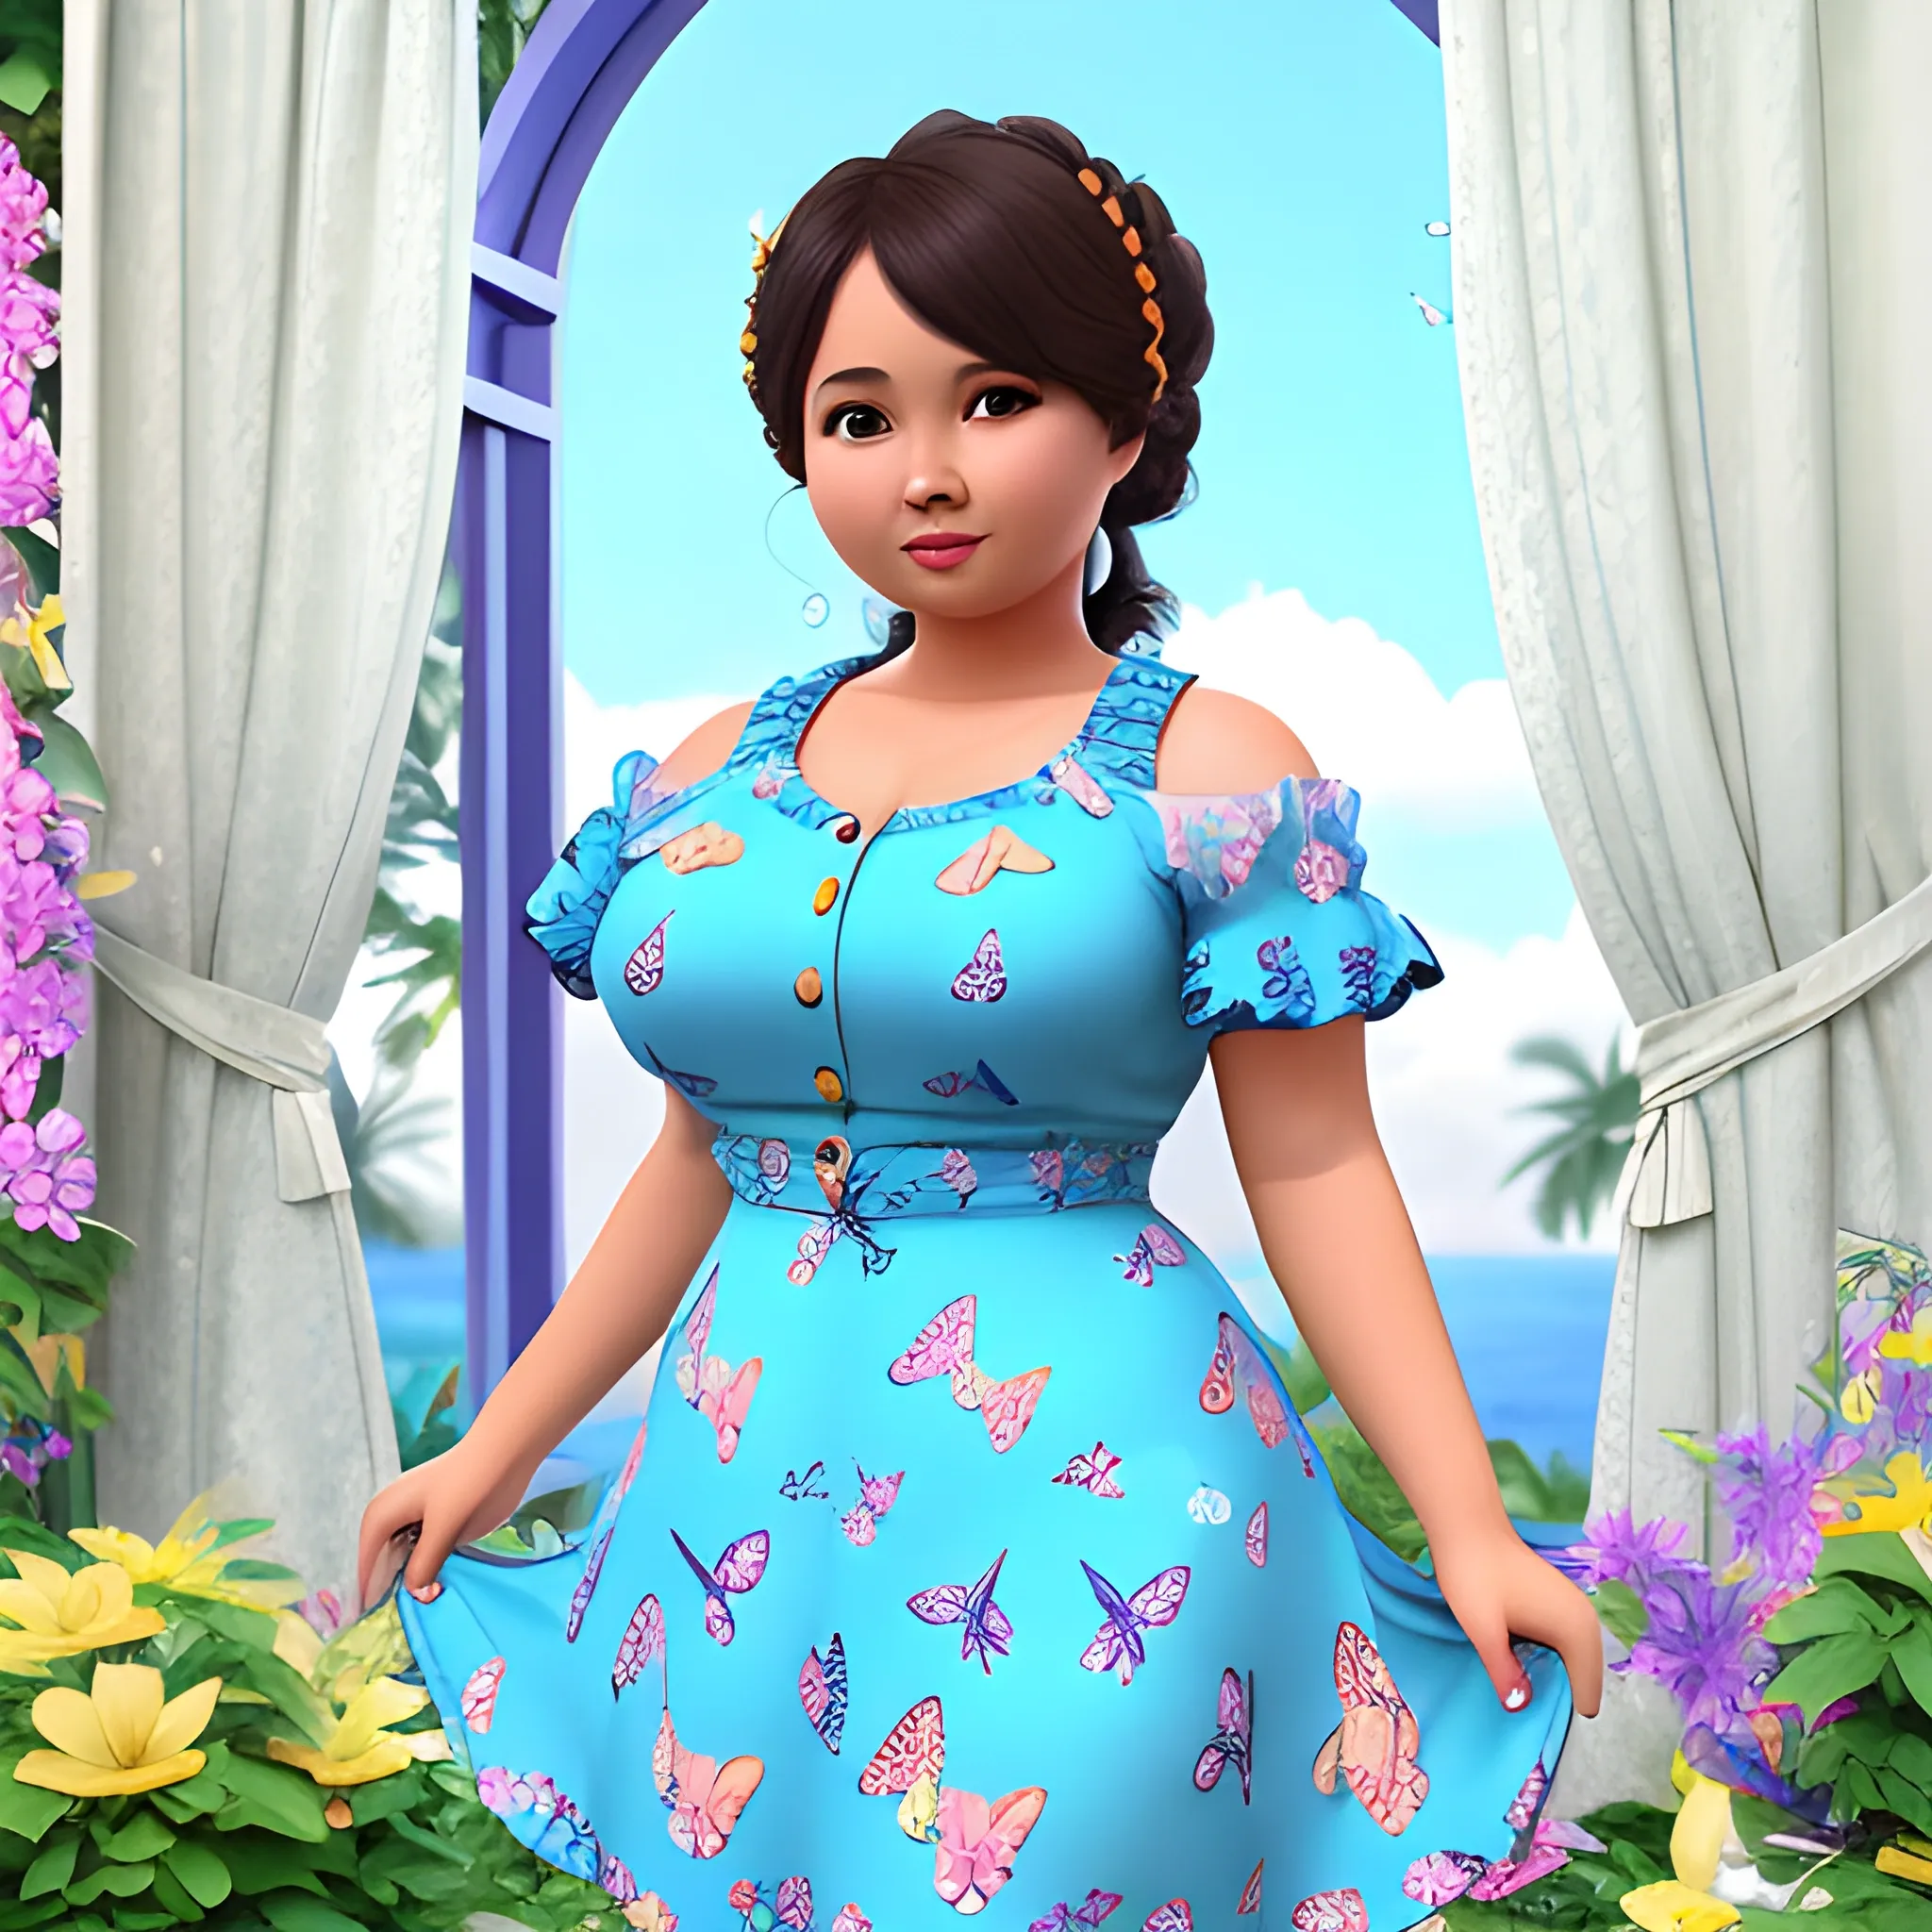 5'4 thick chubby gorgeous Filipina tanned skin chubby cheeks woman with short butterfly curly hair and cute flat button nose in a blue floral Sunday dress, 3D, 3D